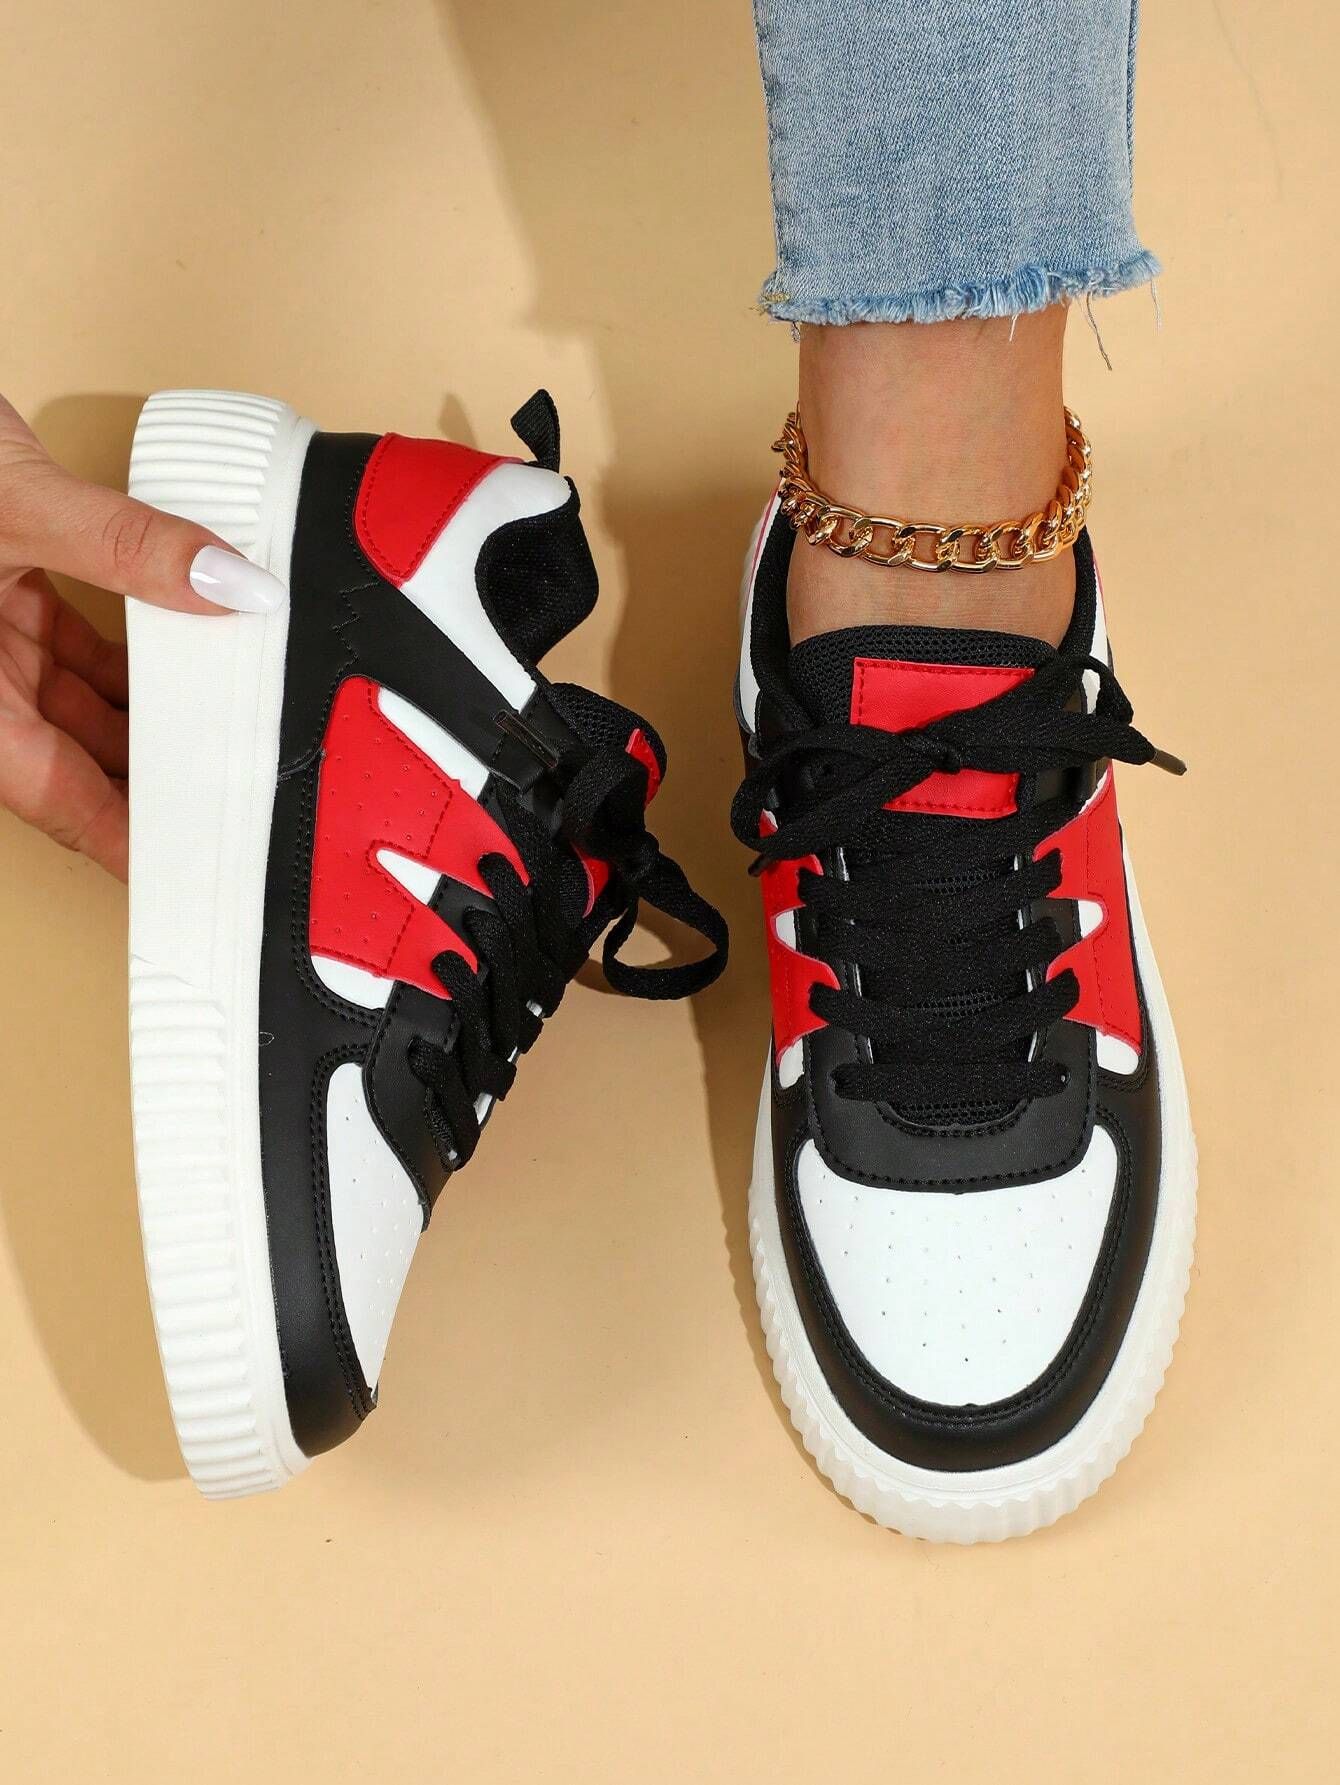 Unisex Fashionable And Comfortable Commuting Sneakers In White, Black, And Red Color Block Design | SHEIN